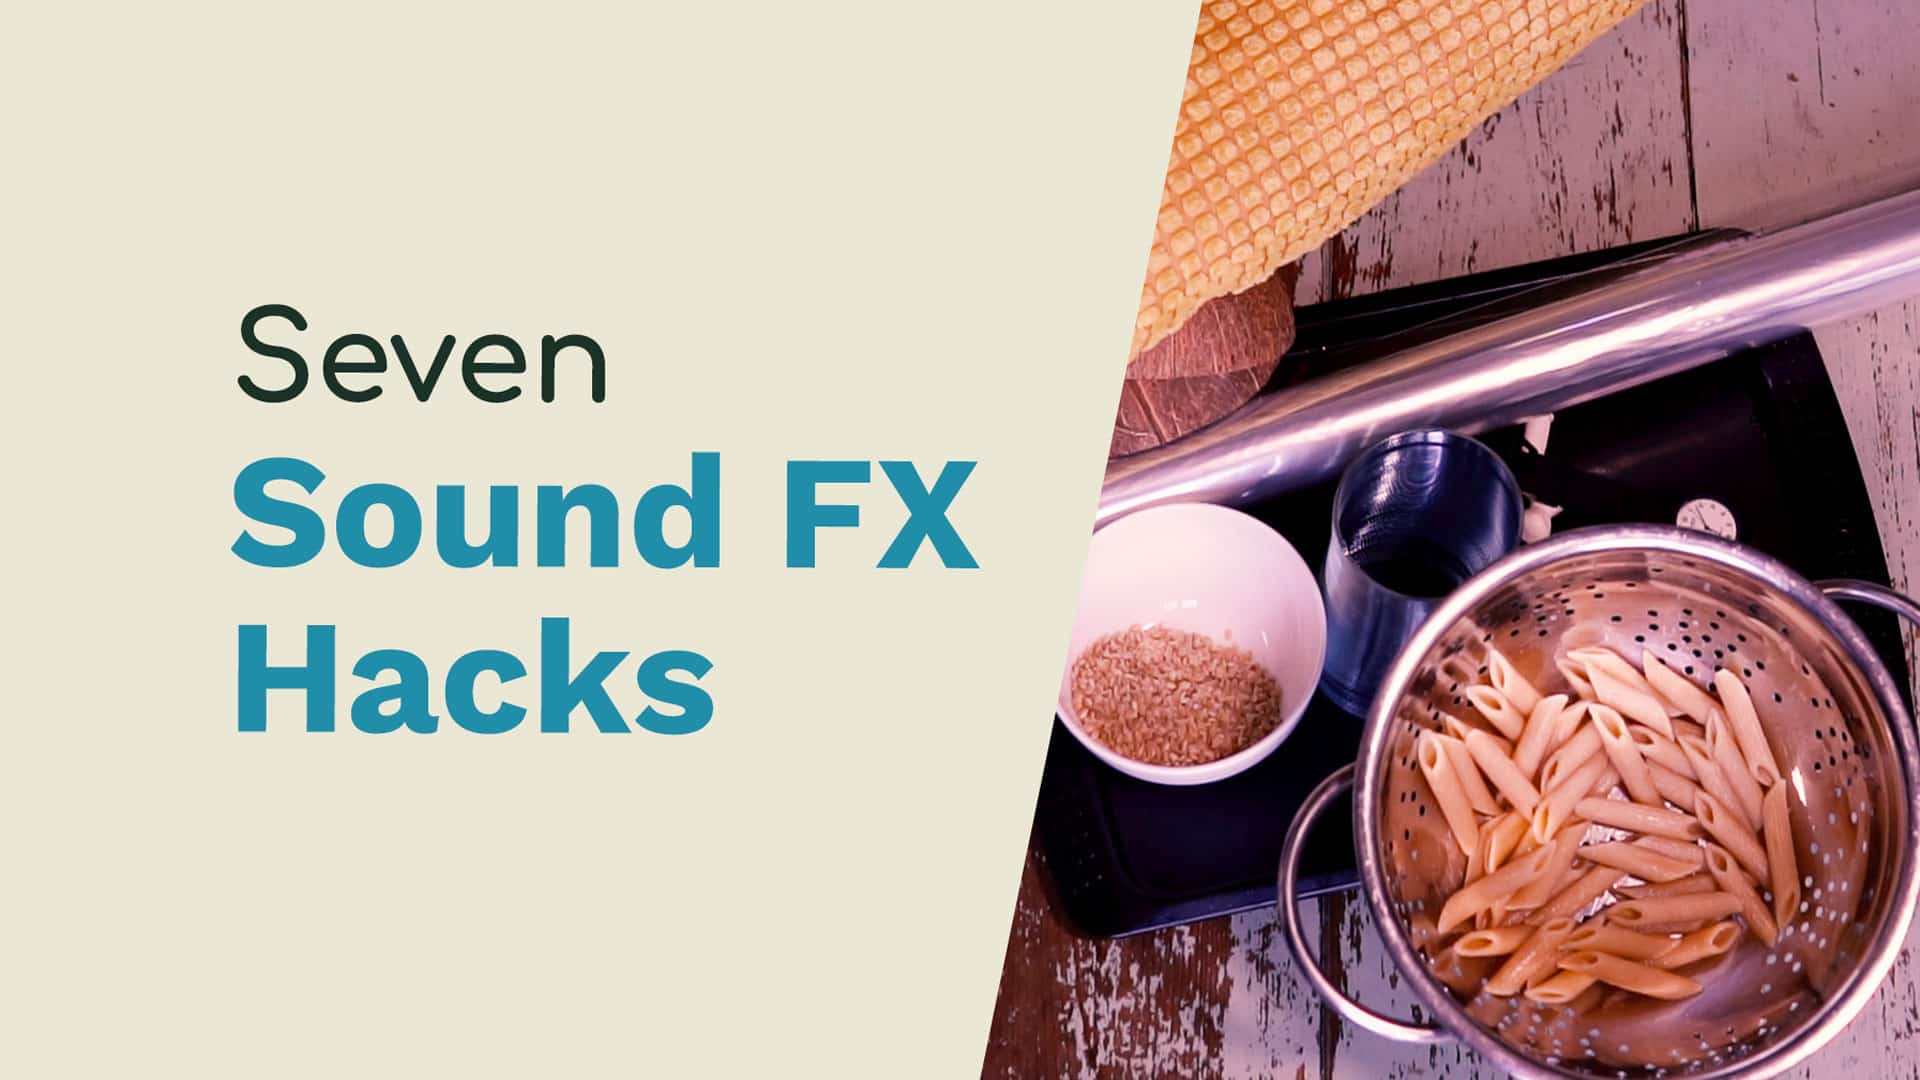 7 Sound Effects Hacks Using Everyday Items General sound effects Music Radio Creative